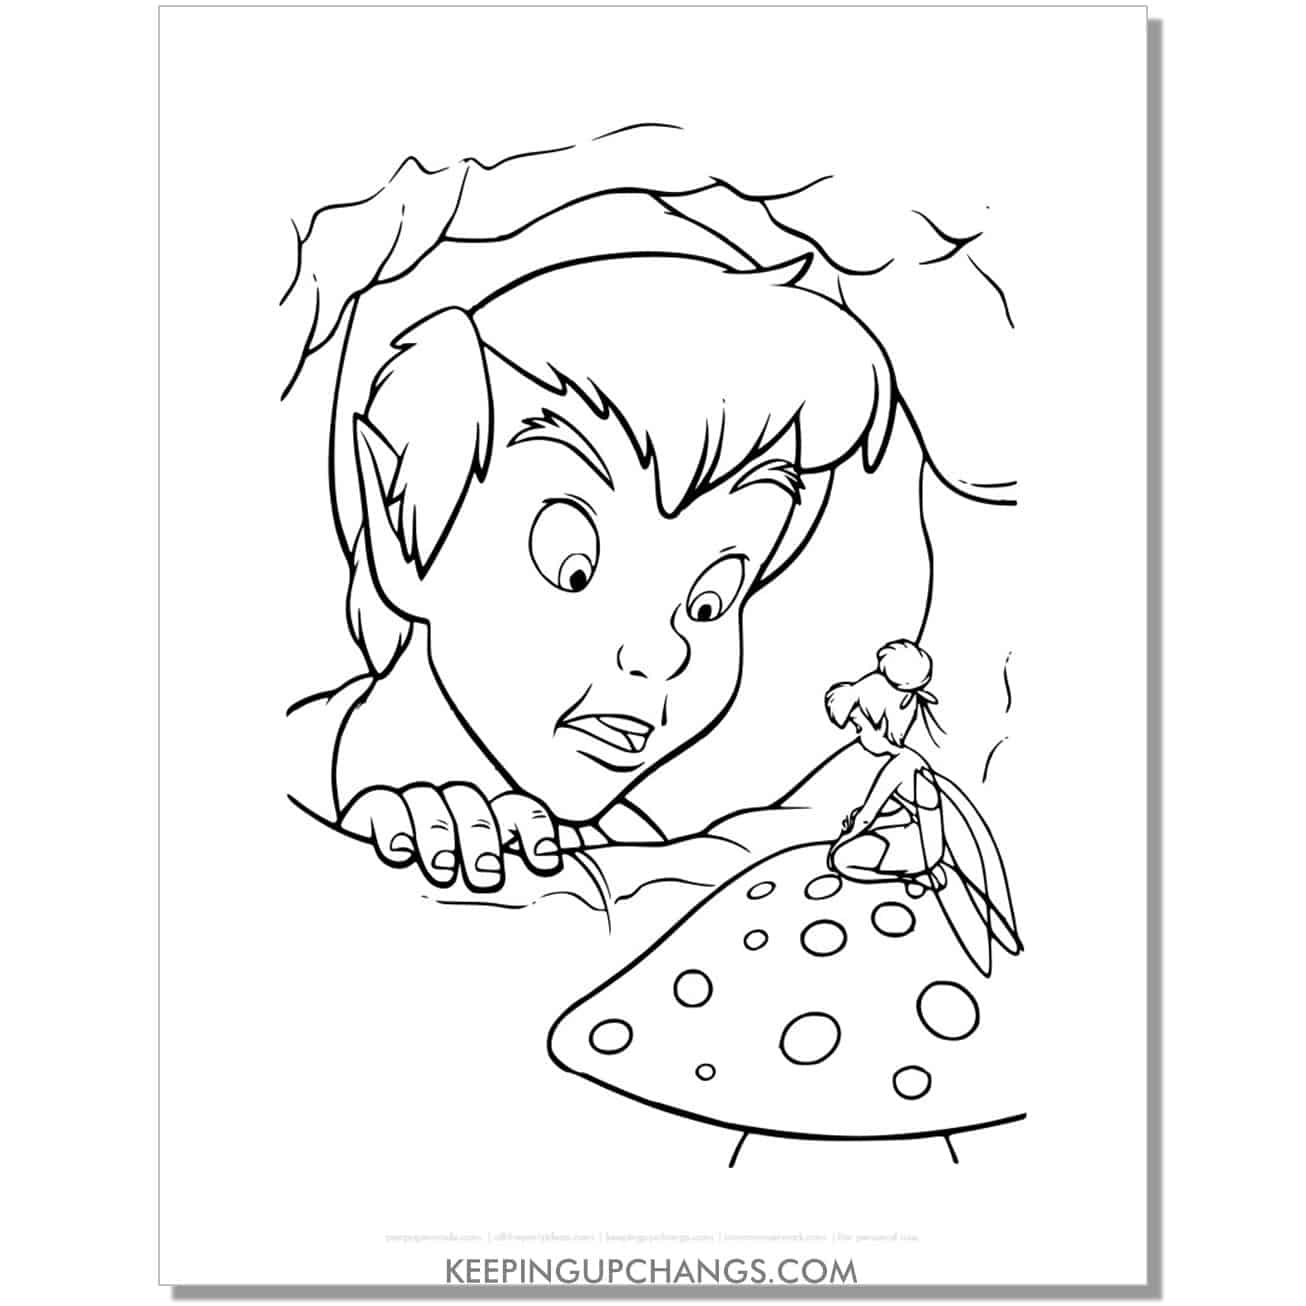 peter pan peers into tinkerbell's home in tree stump coloring page, sheet.